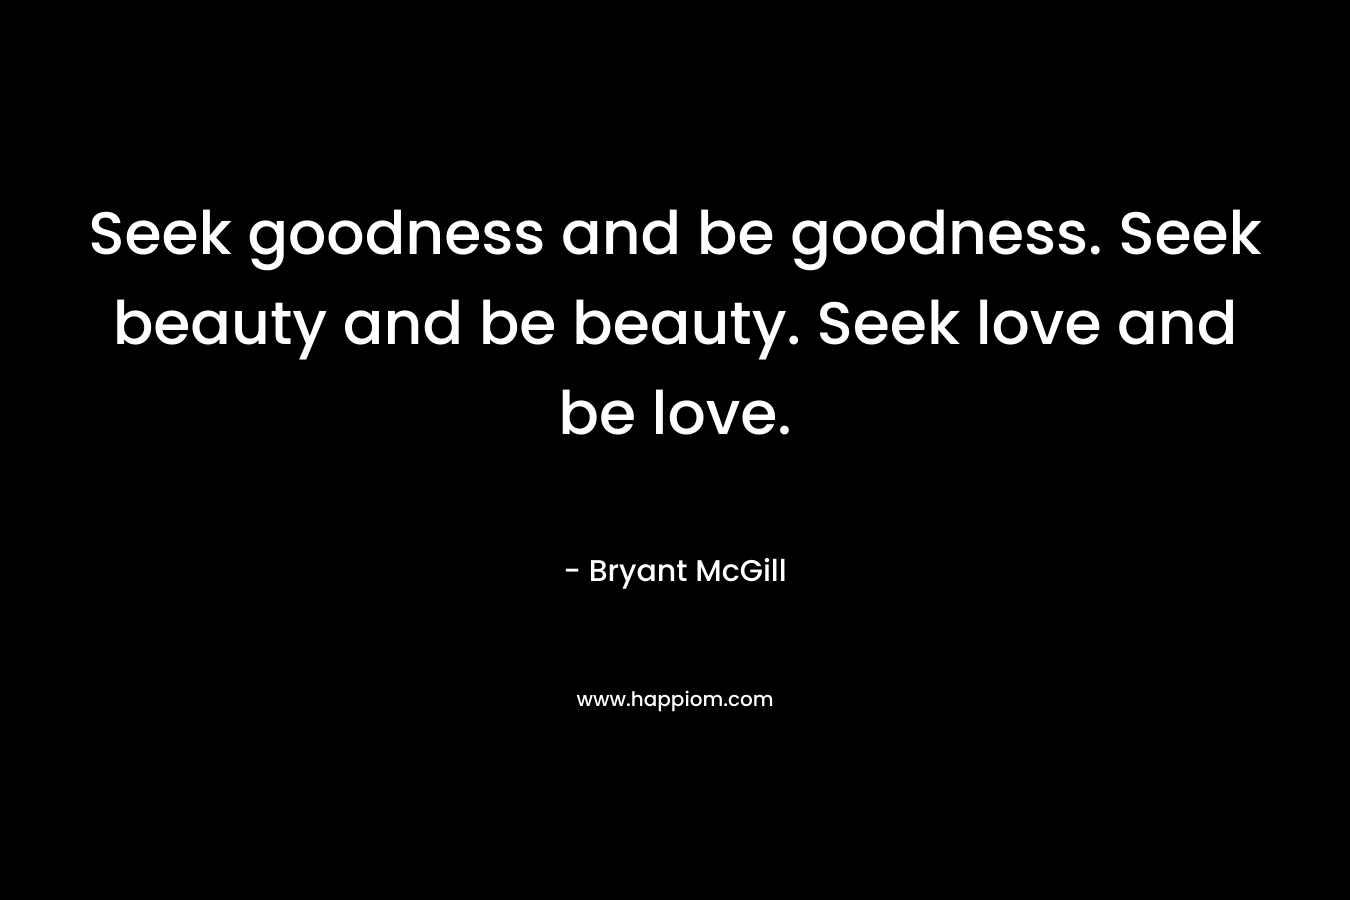 Seek goodness and be goodness. Seek beauty and be beauty. Seek love and be love. – Bryant McGill